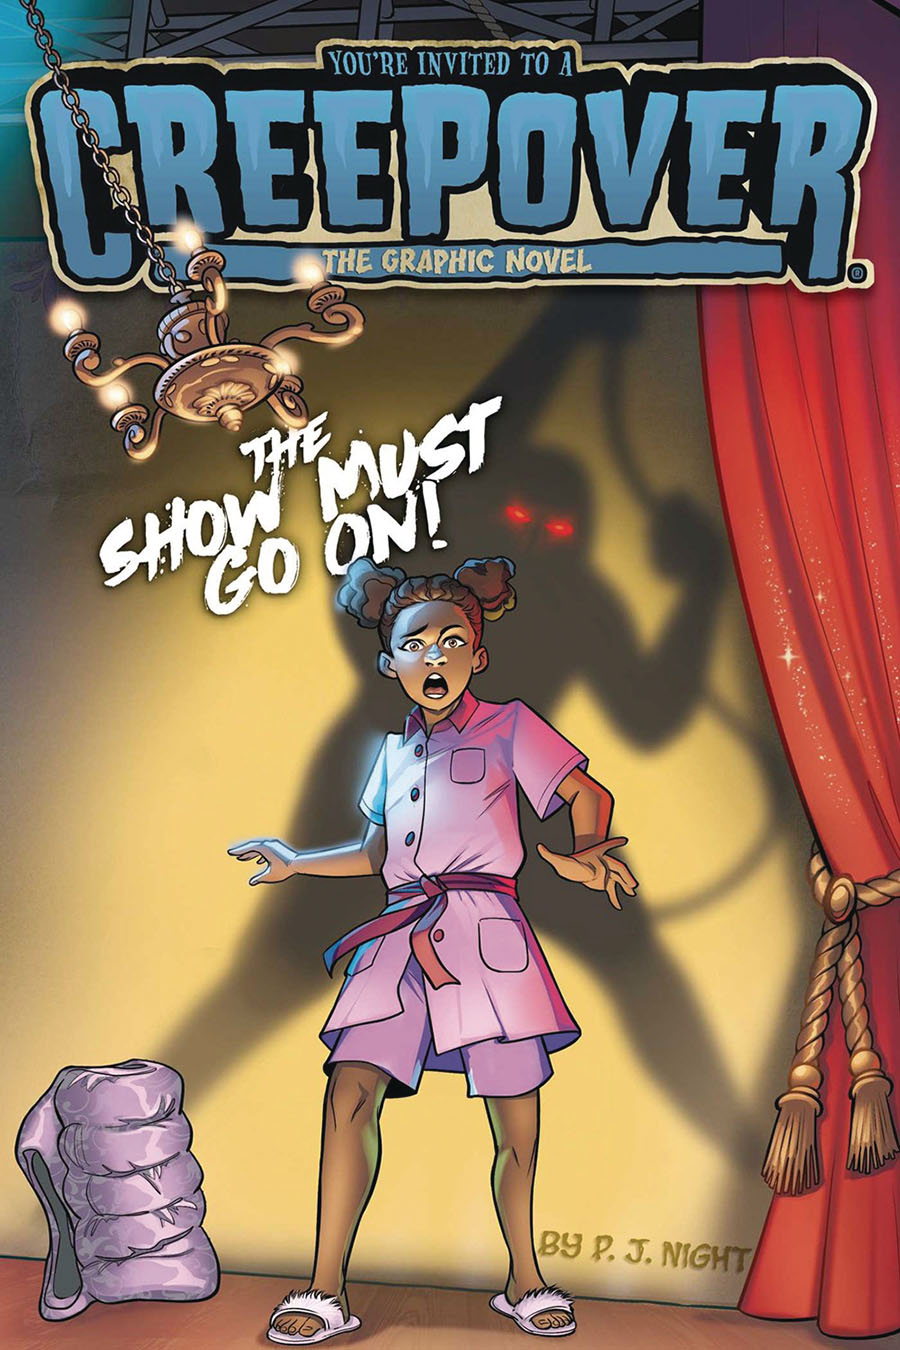 Youre Invited To A Creepover The Graphic Novel Vol 4 The Show Must Go On TP